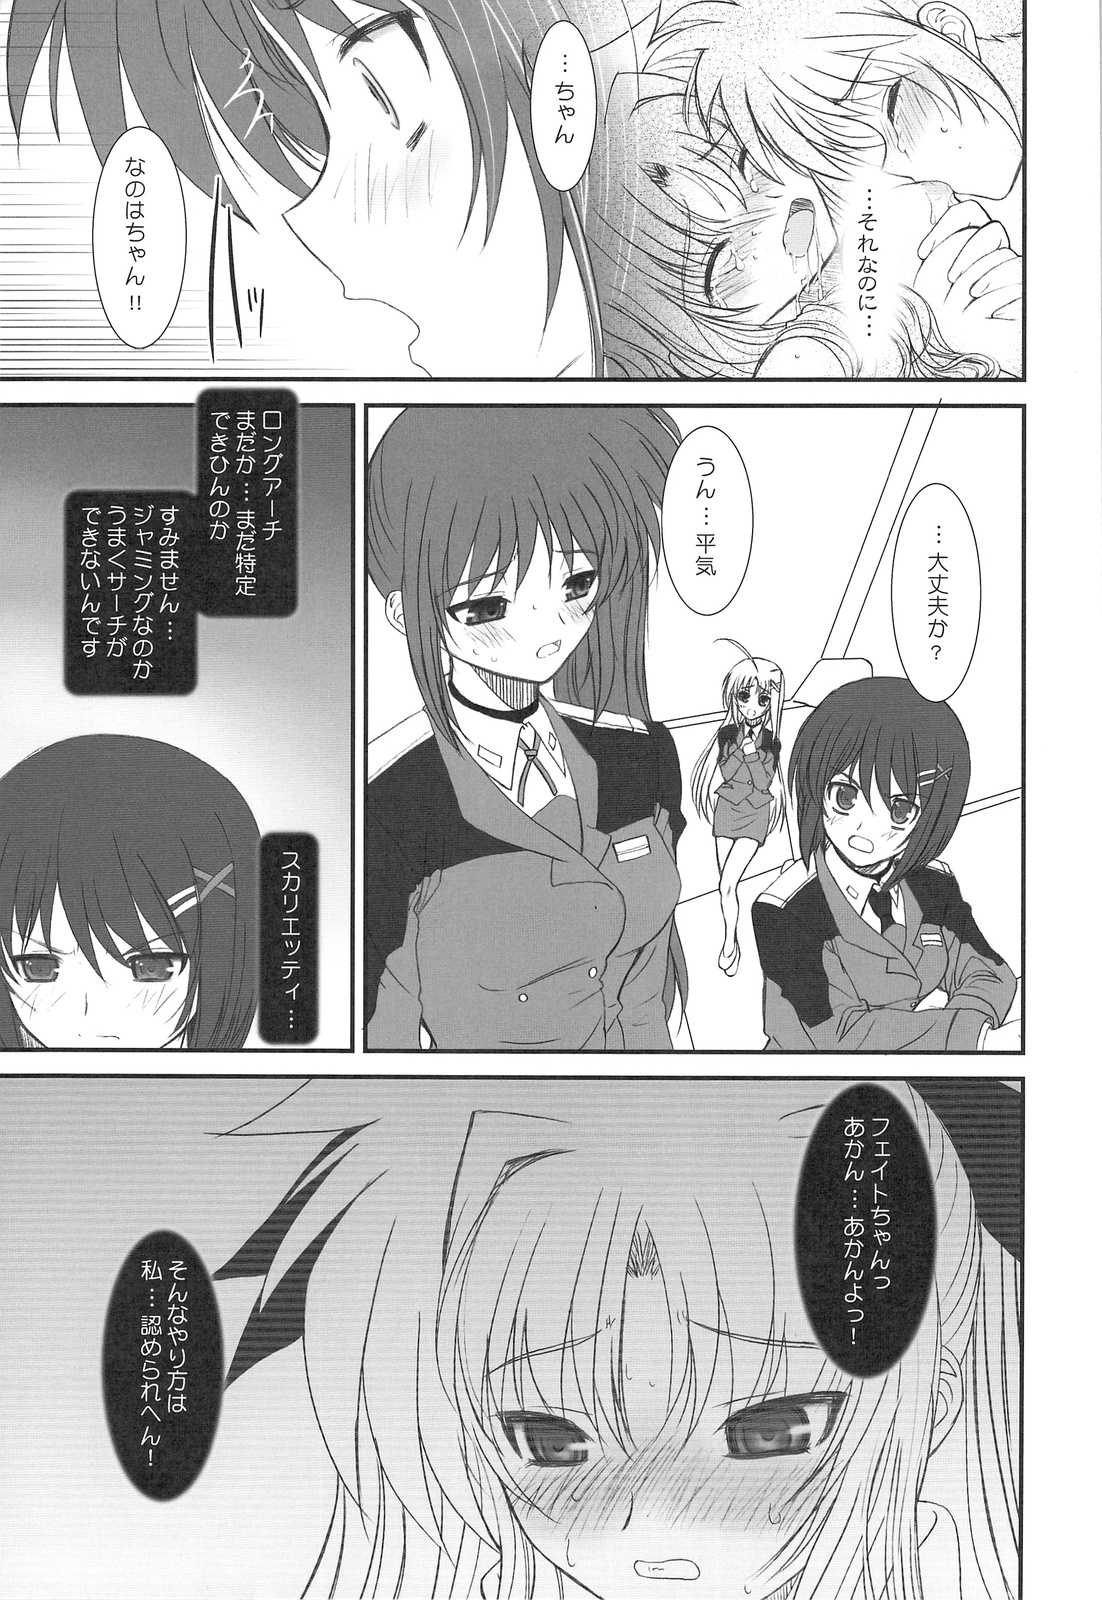 [Dieppe Factory] FATE FIRE WITH FIRE BOOK 2 (nanoha)(C75) 